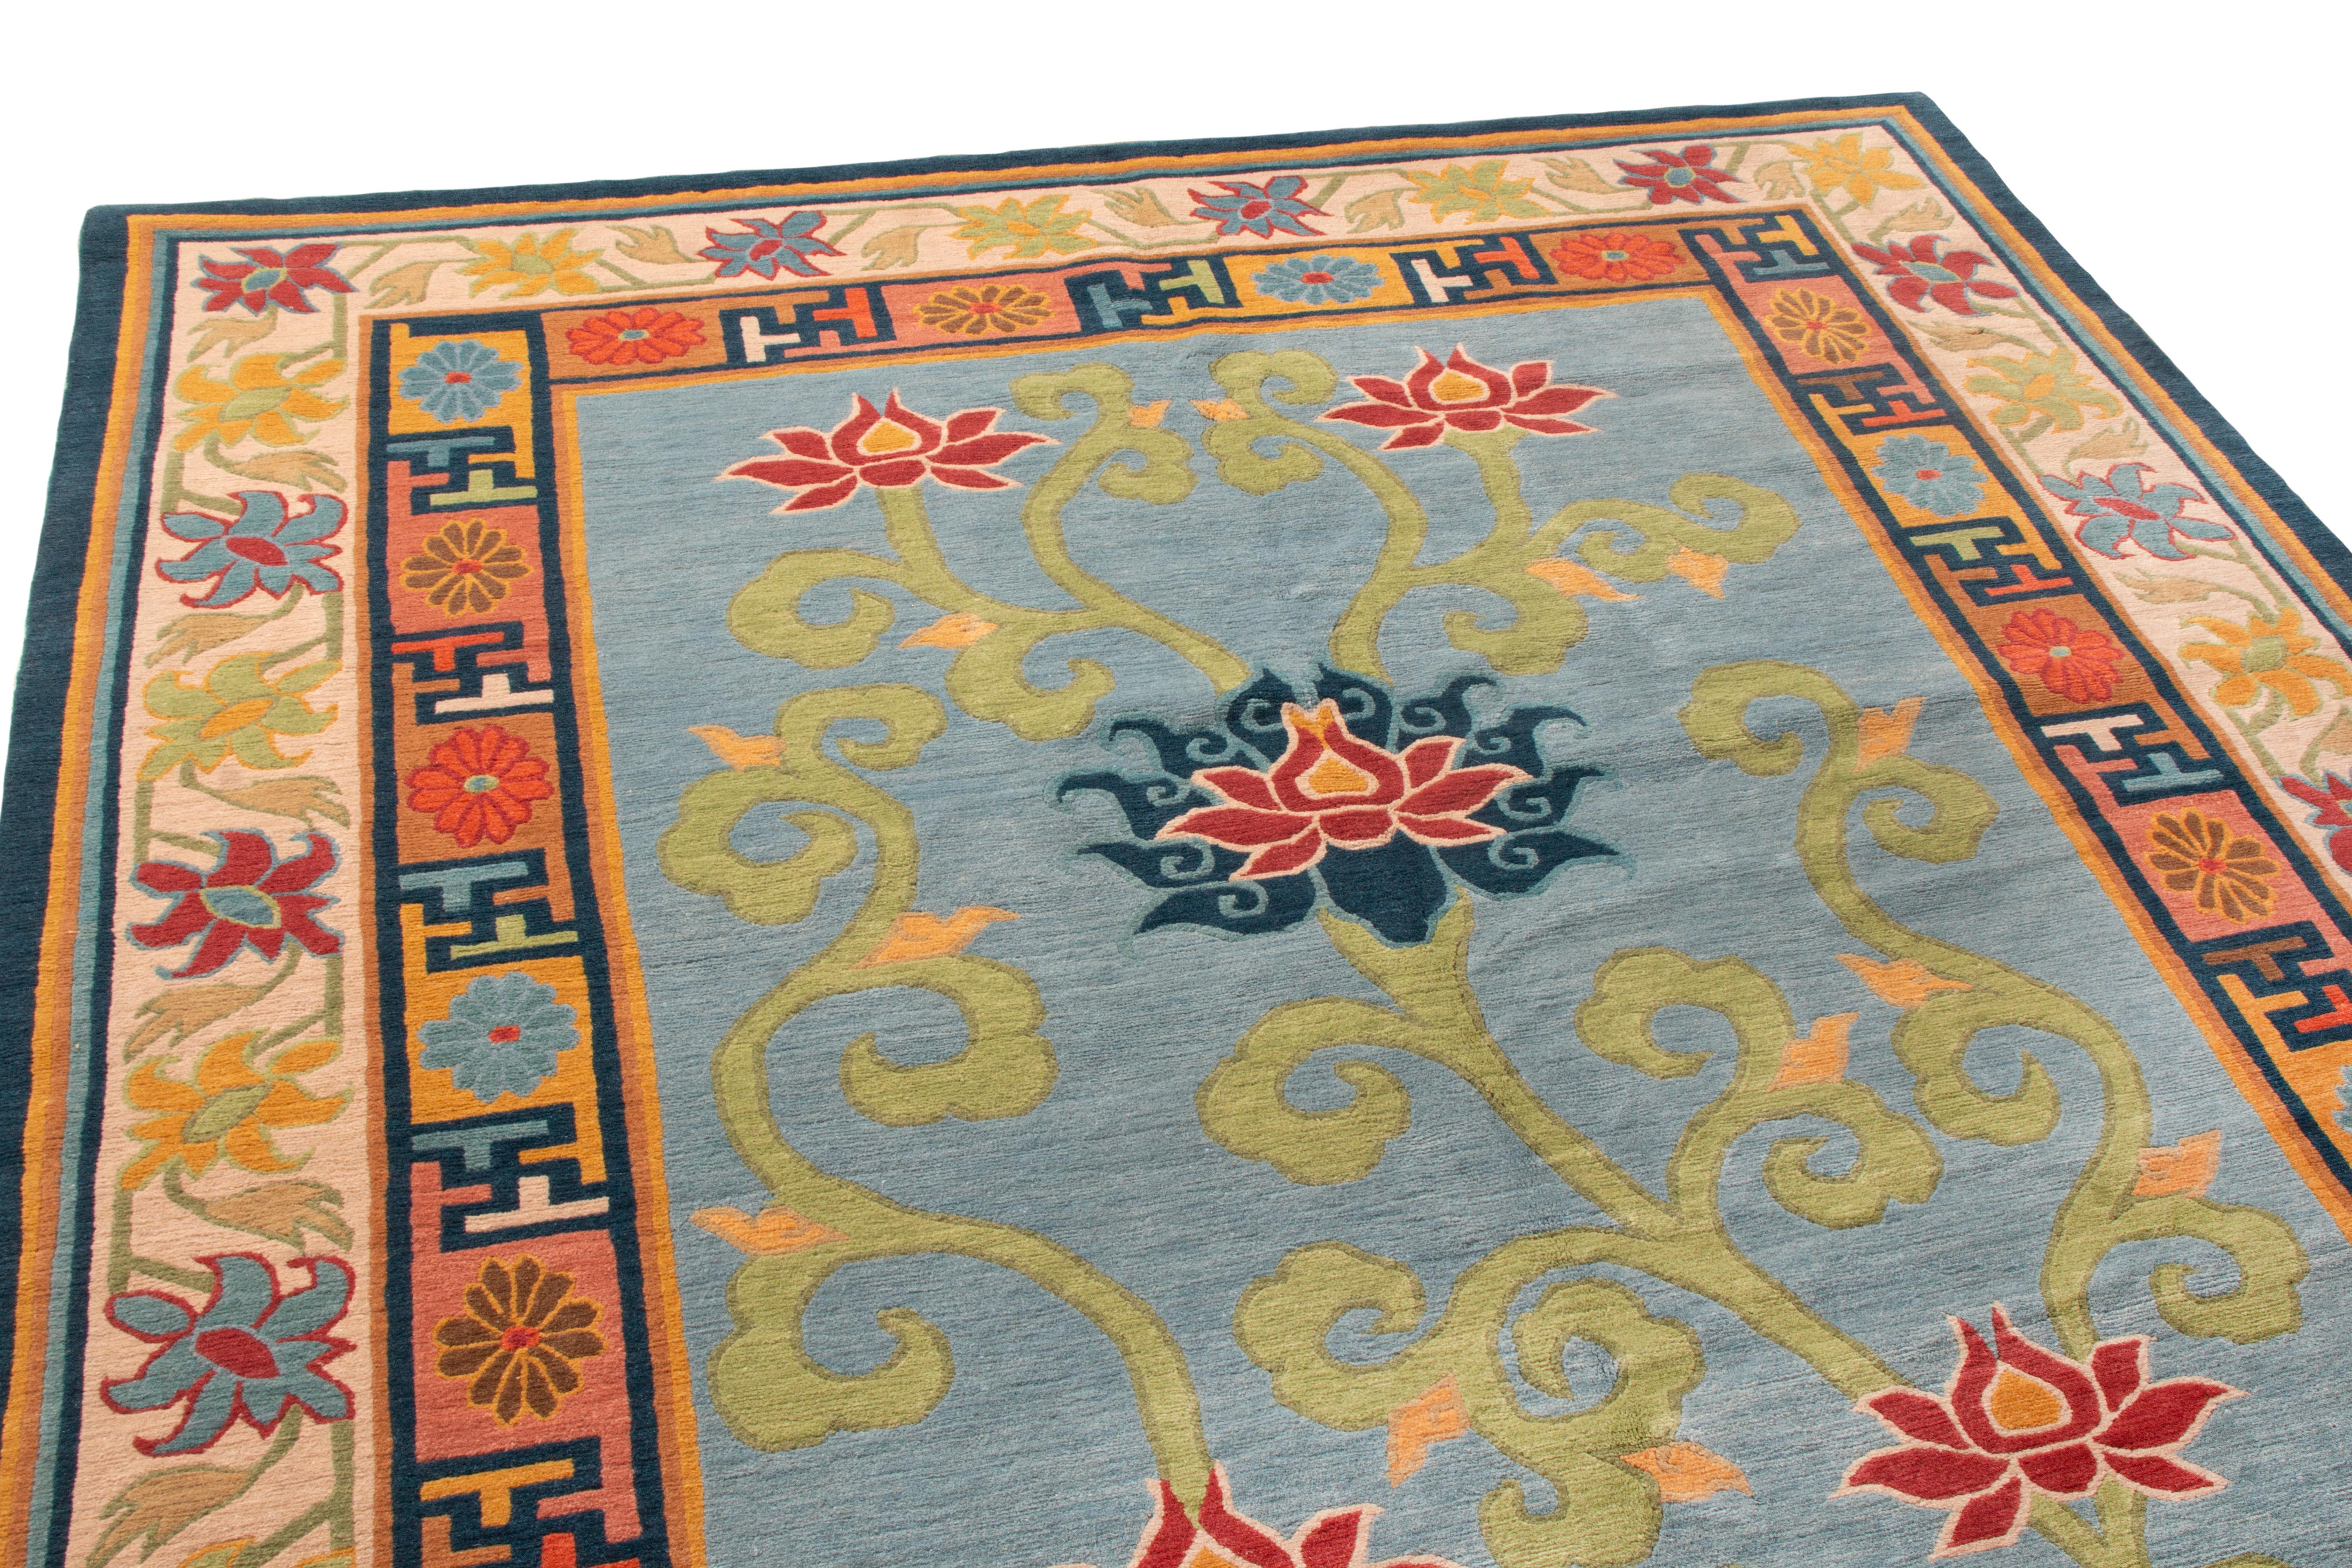 Originating from one of our premiere workshops in Nepal, this hand knotted lotus design rug by Rug & Kilim is the latest in our Classic style sub collection, embracing an exceptional European interpretation of Classic eastern symbolism believed to